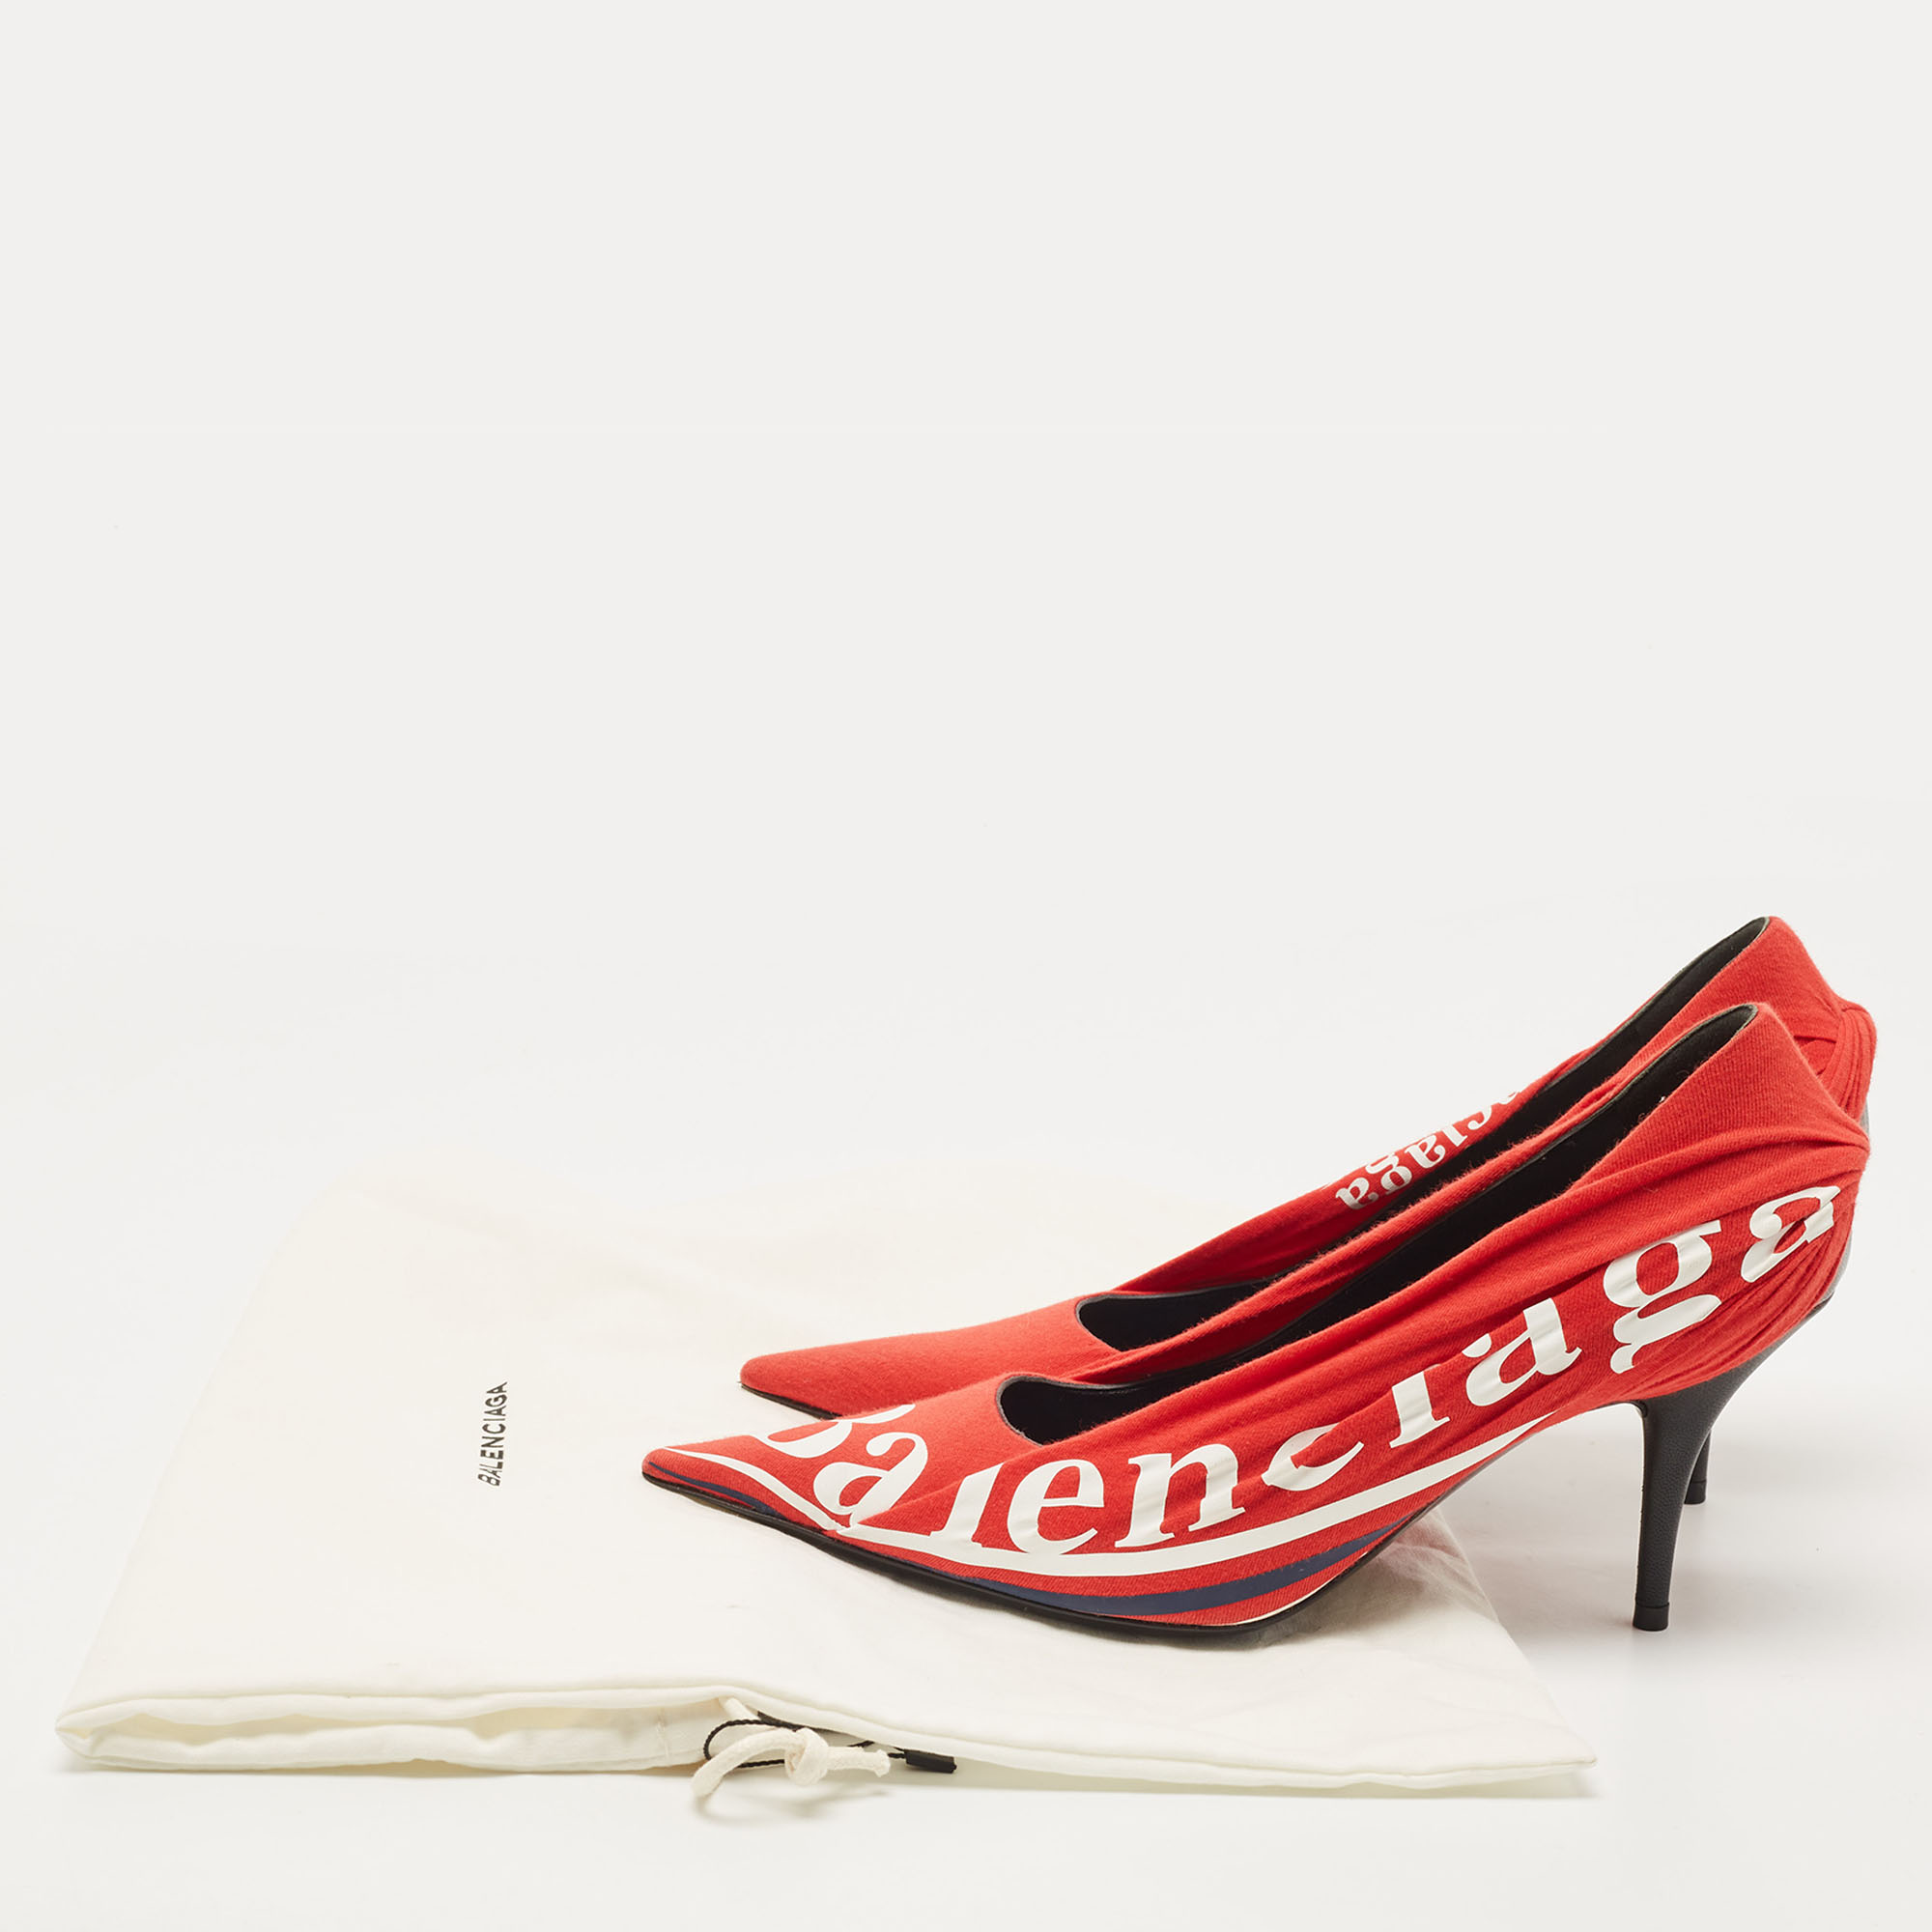 Balenciaga Red/Black Fabric And Leather Logo Knife Pumps Size 37